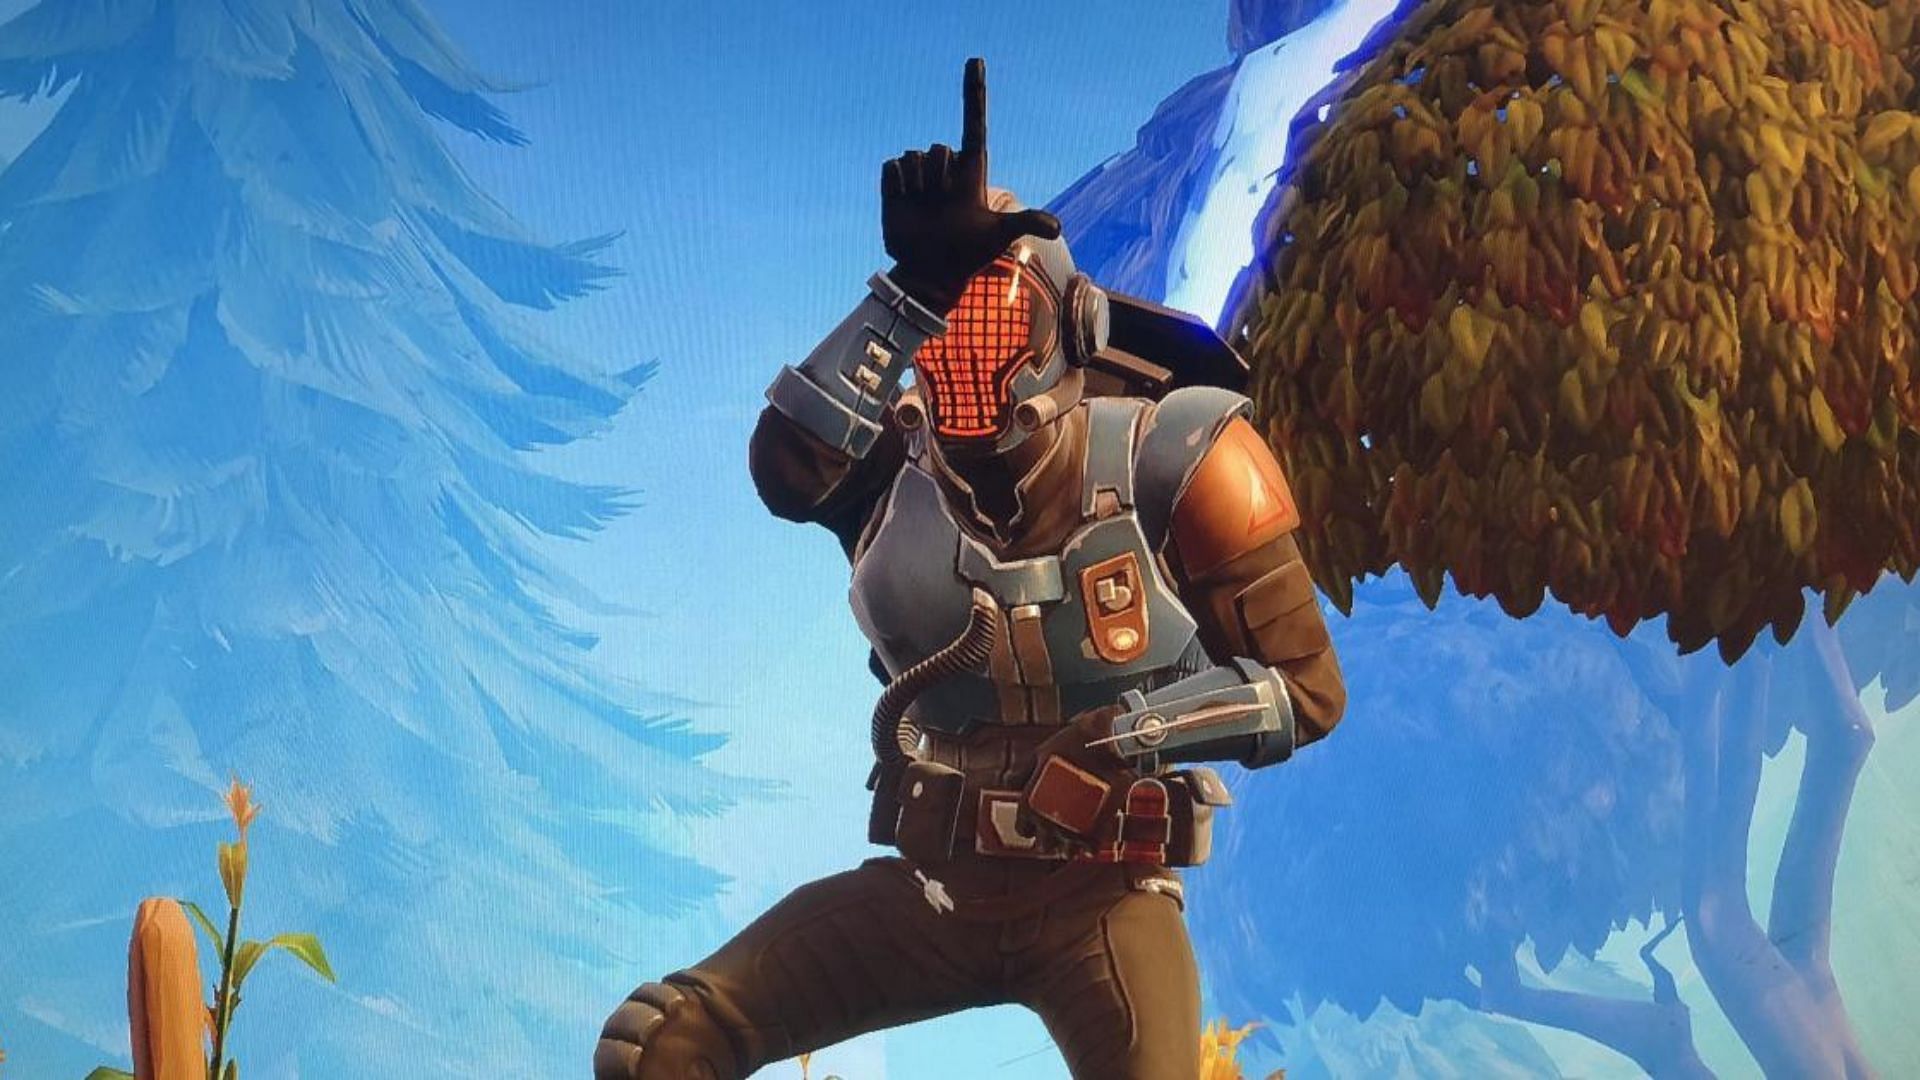 Fortnite has quite the selection of toxic emotes for players to choose from (Image via Blasting News)